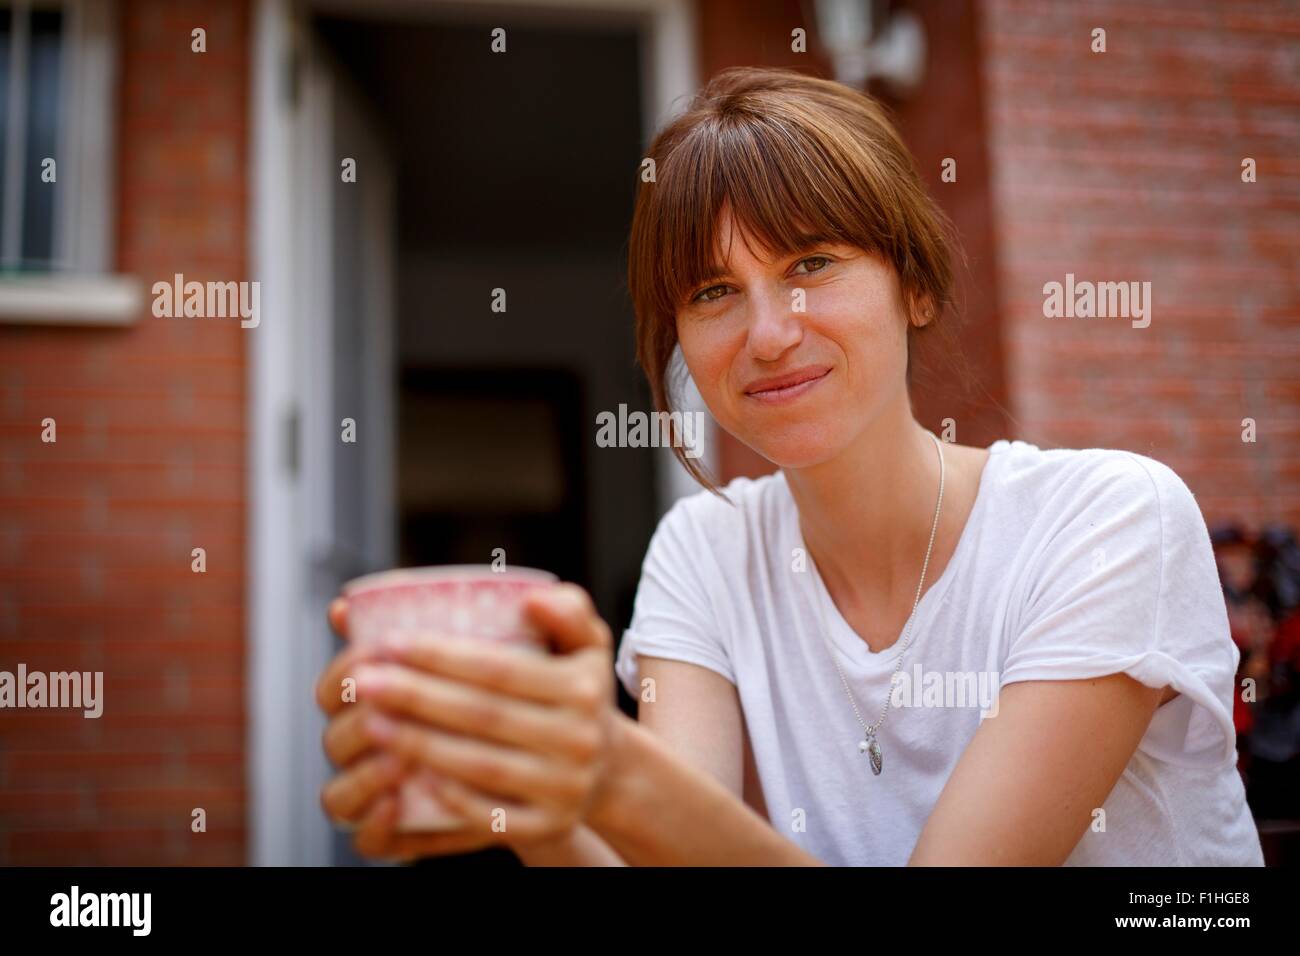 Mid adult woman sitting smelling lavender, smiling at camera Stock Photo